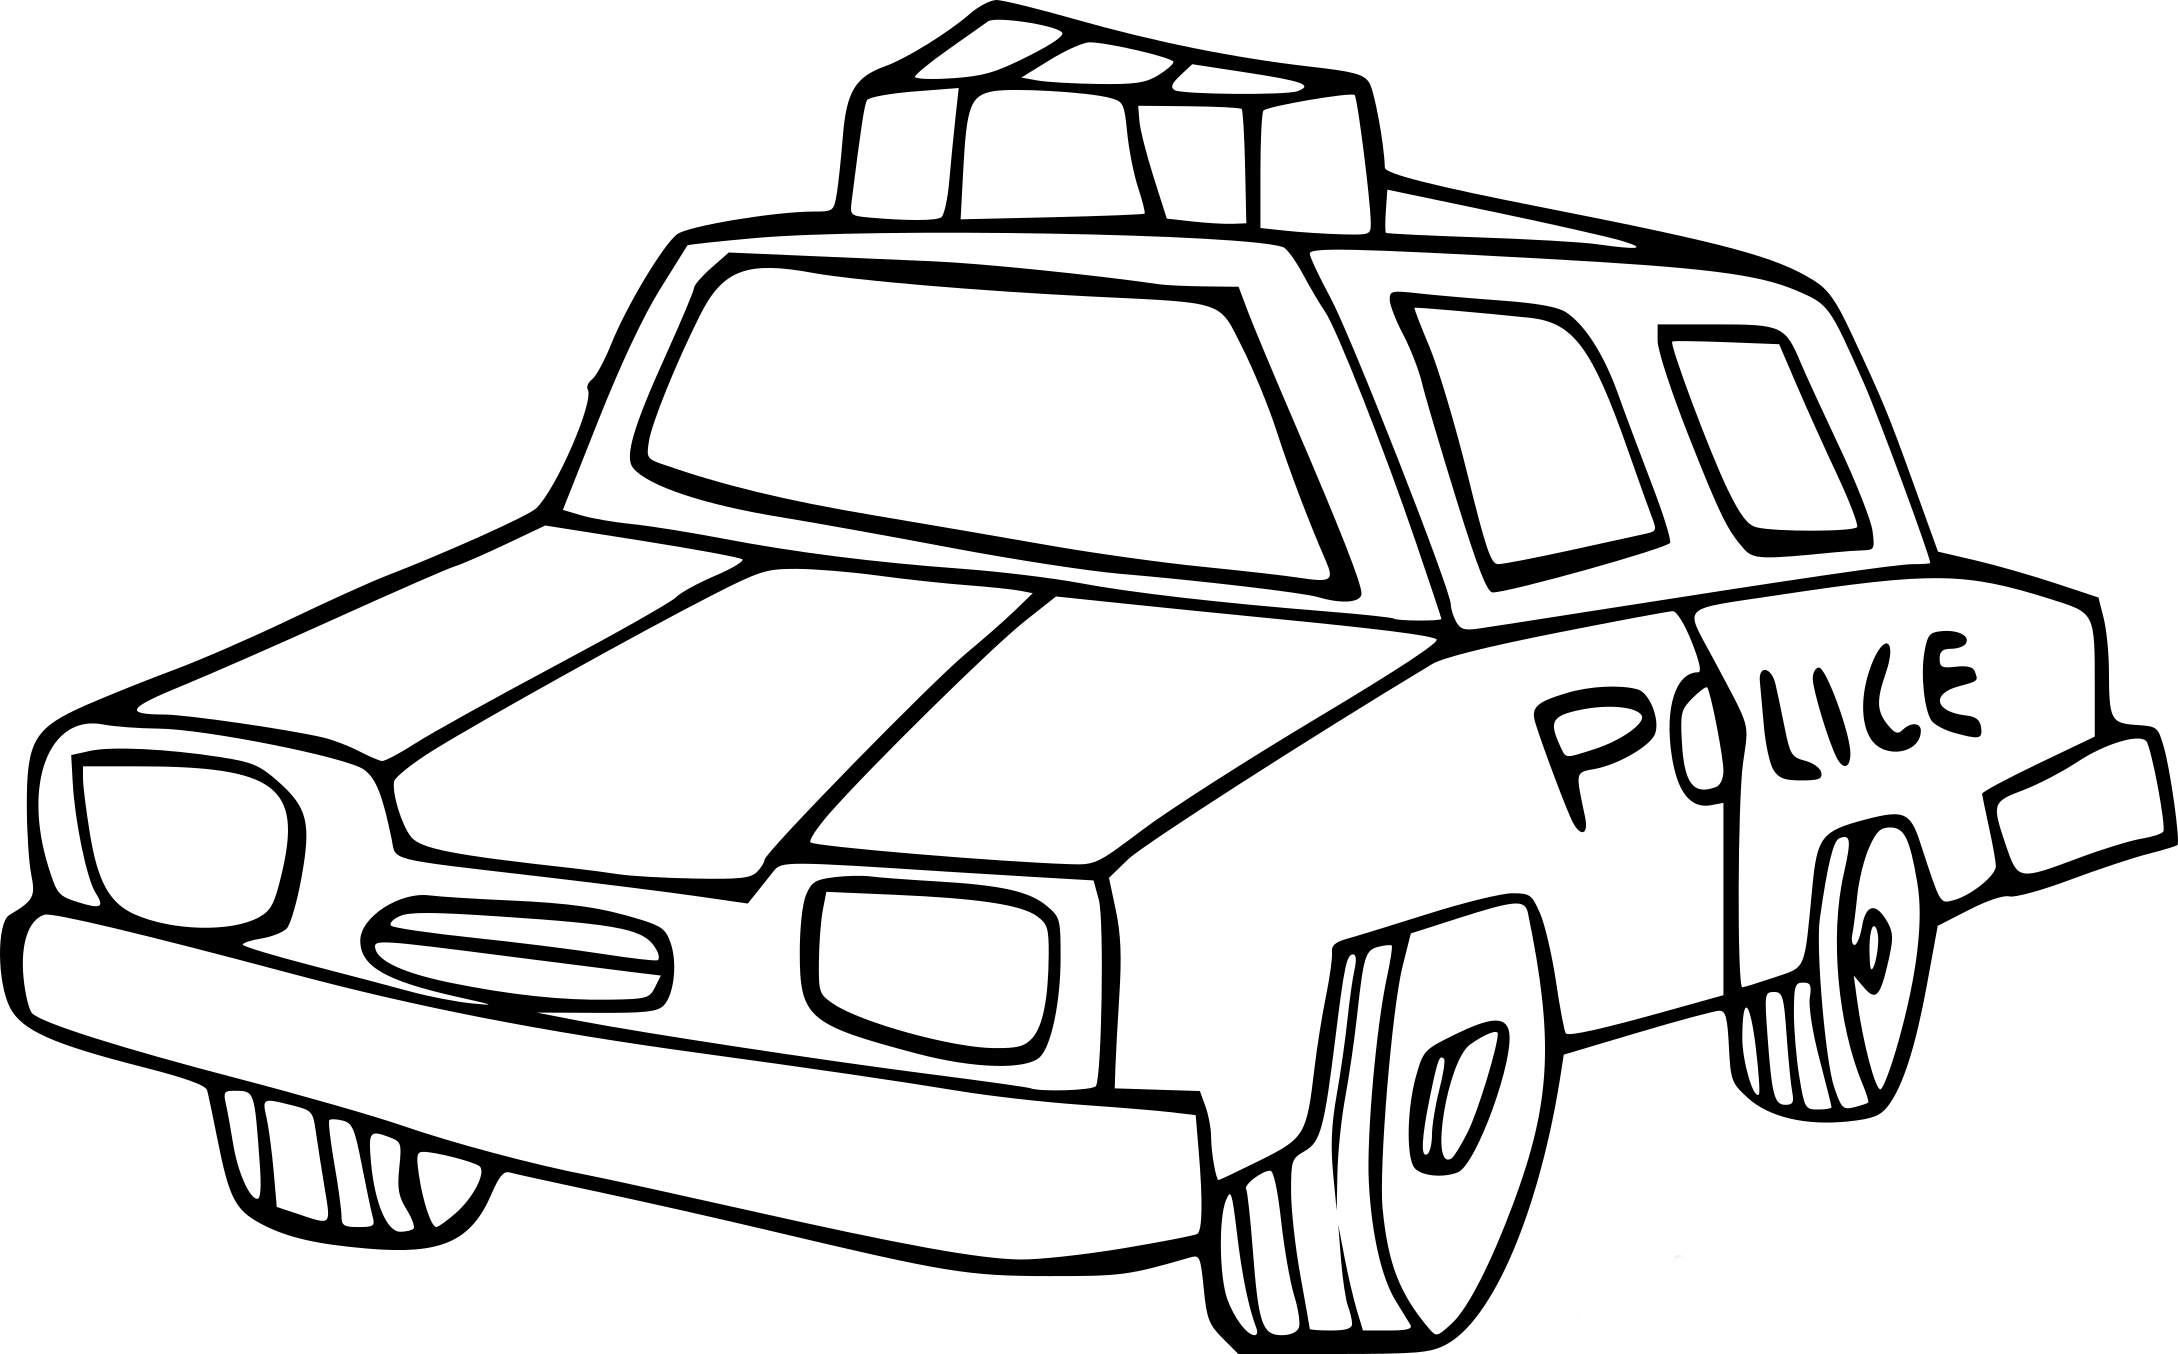 Police Car coloring page